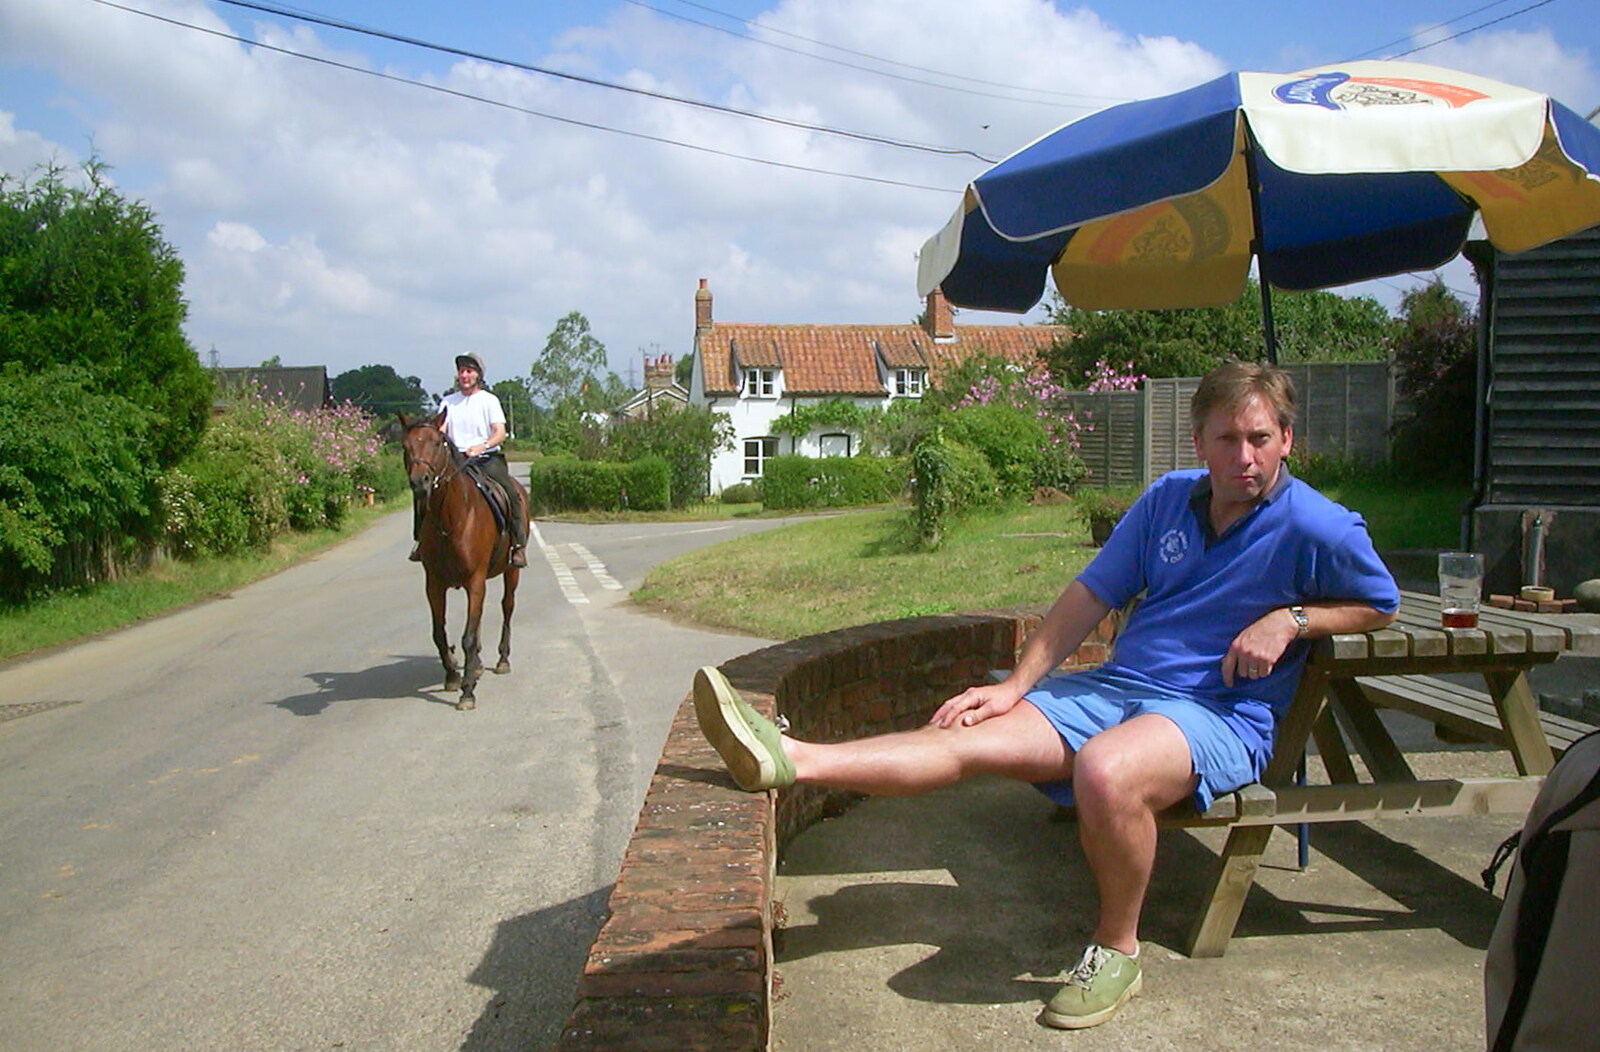 A BSCC Splinter Group Camping Weekend, Theberton, Suffolk - 11th August 2002: Nigel gets some sun as a horse trots by